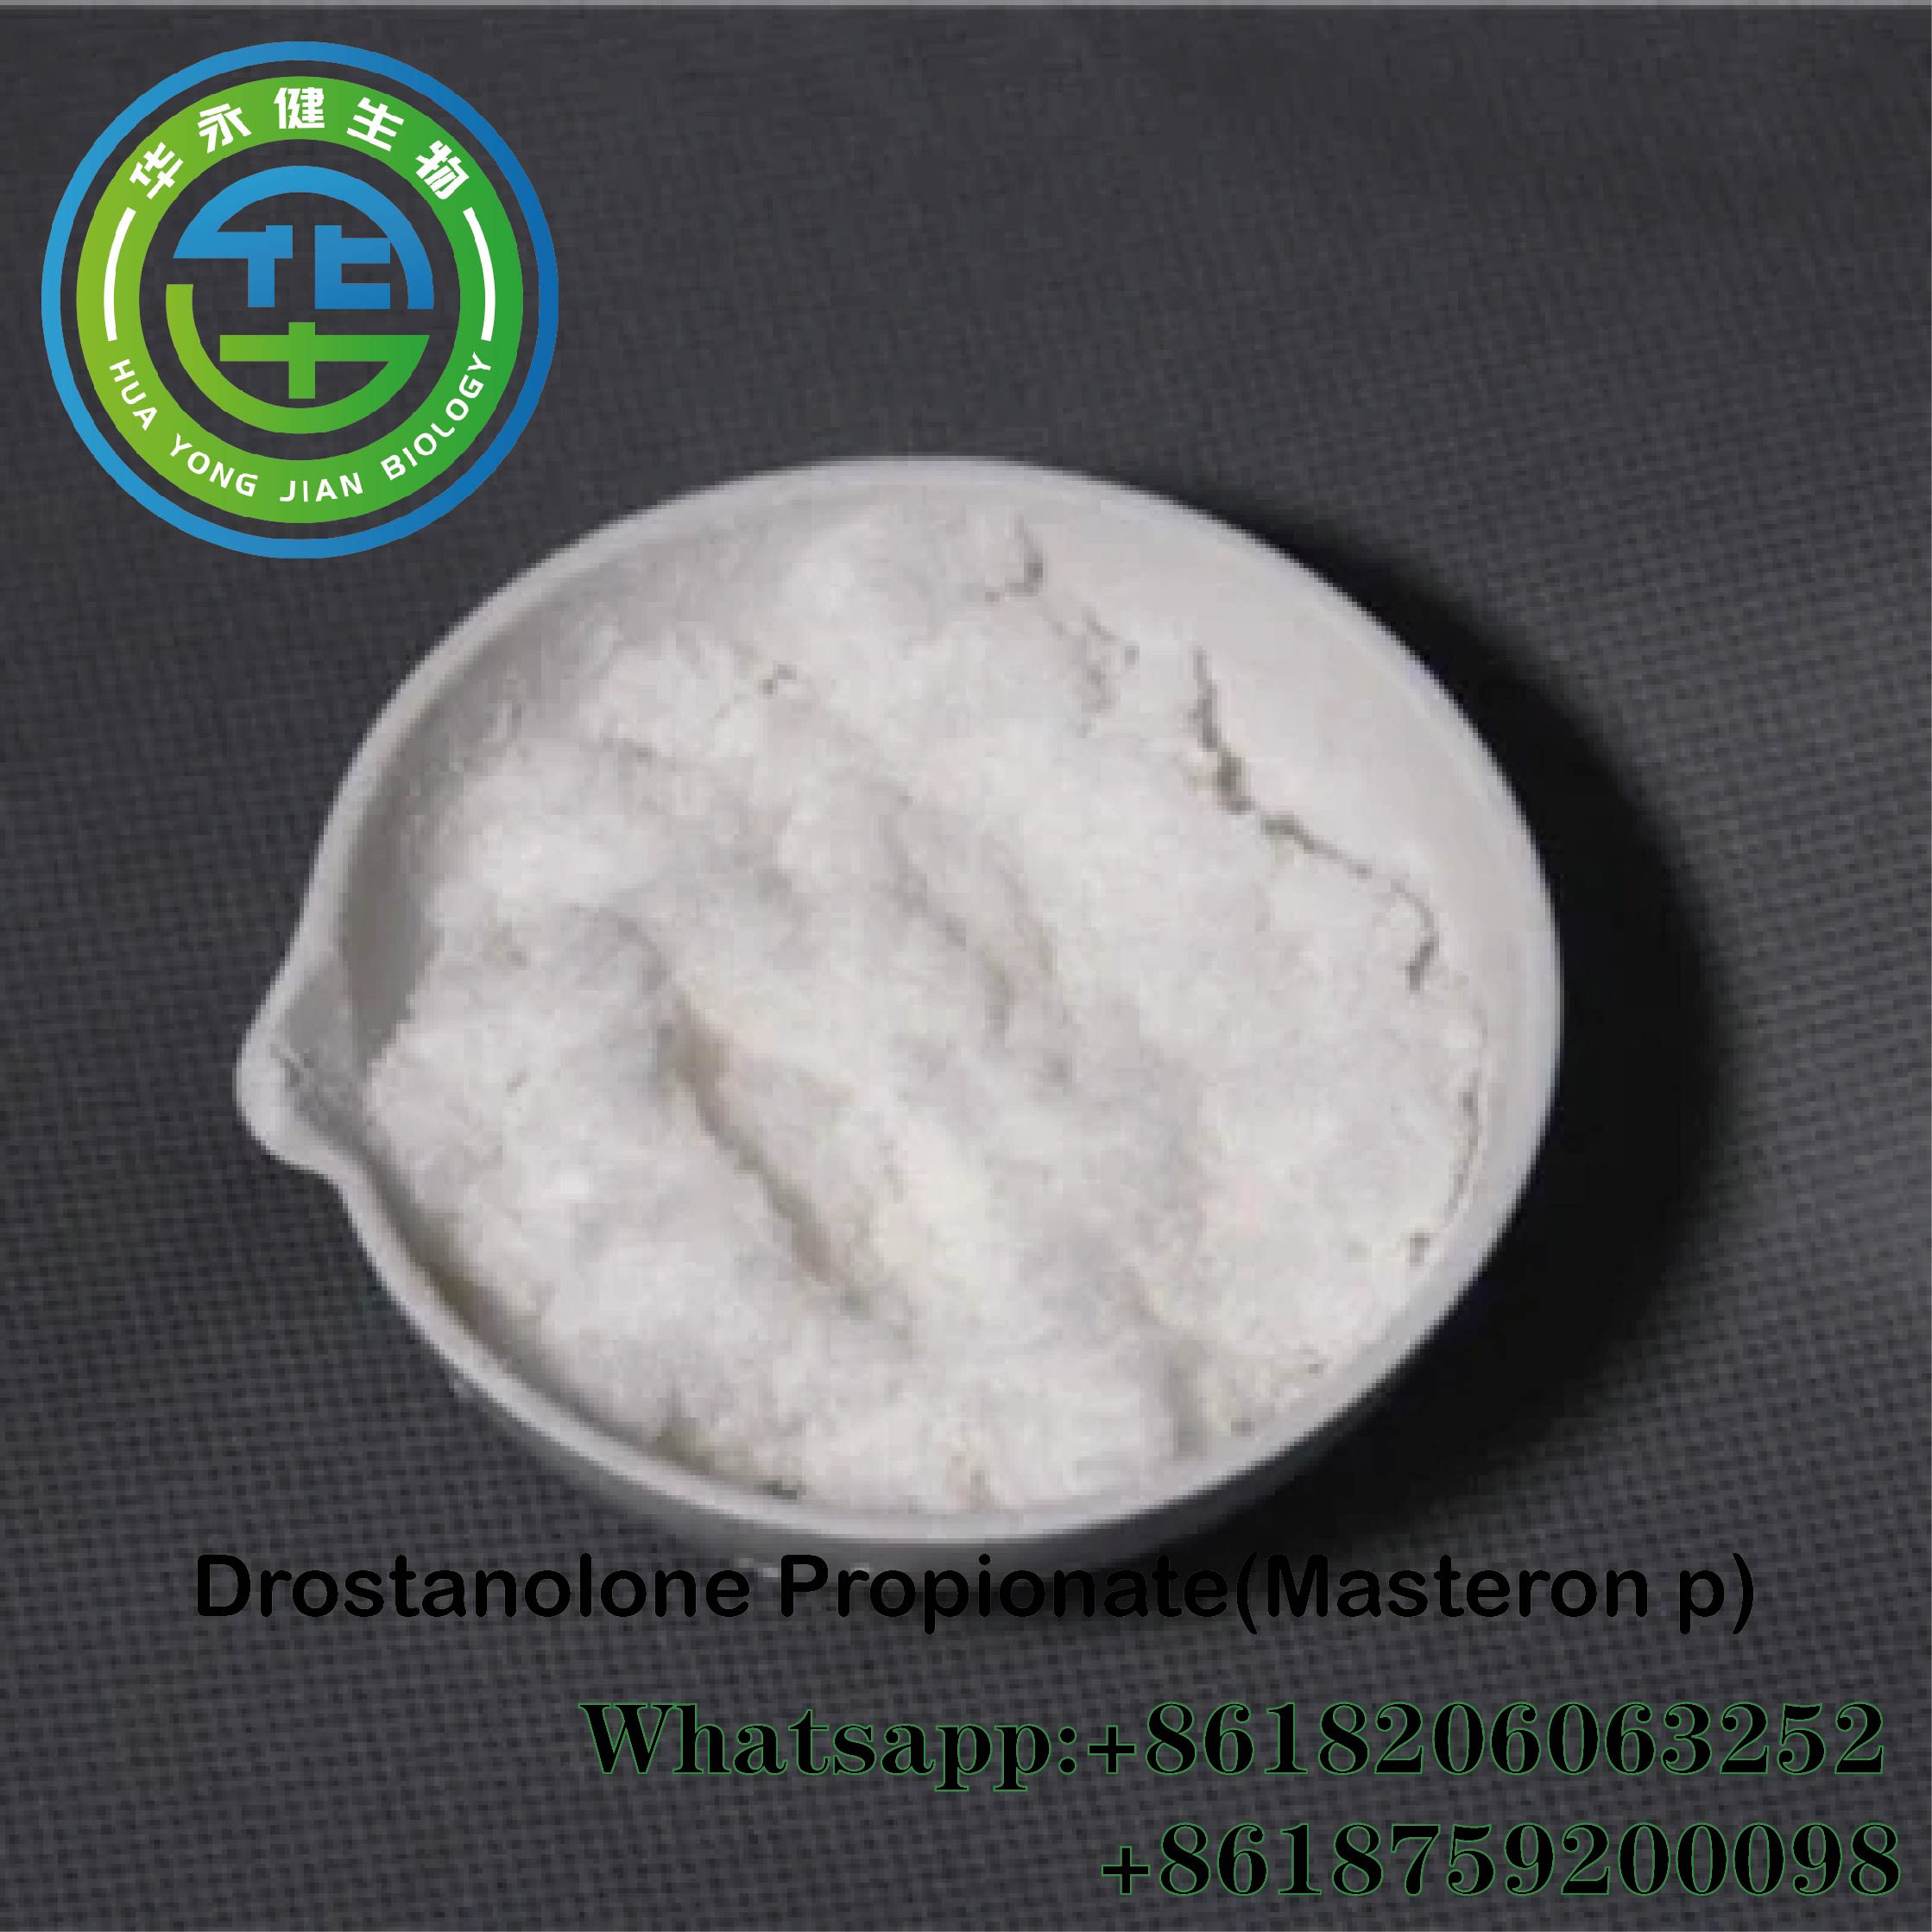 Masteron P Top Purity Hormones Raw Powder Drostanolone Propionate Cas 521-12-0 with Safe Shipping and Cheap Price